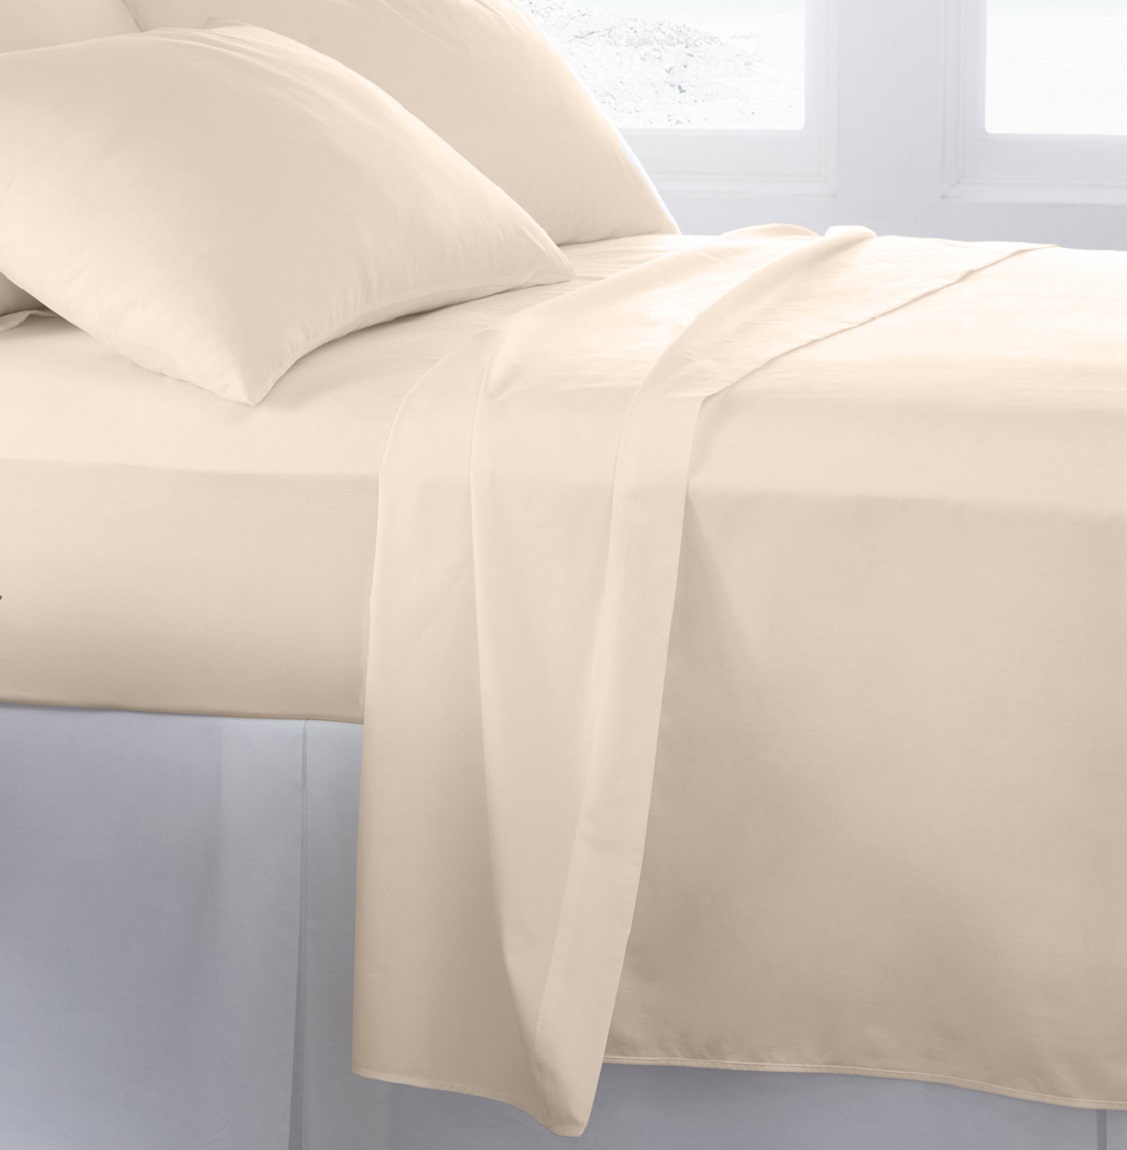 Egyptian Collection 6 Pc. Sheet Set - Full Size - ivory,beige,off white- Polyester